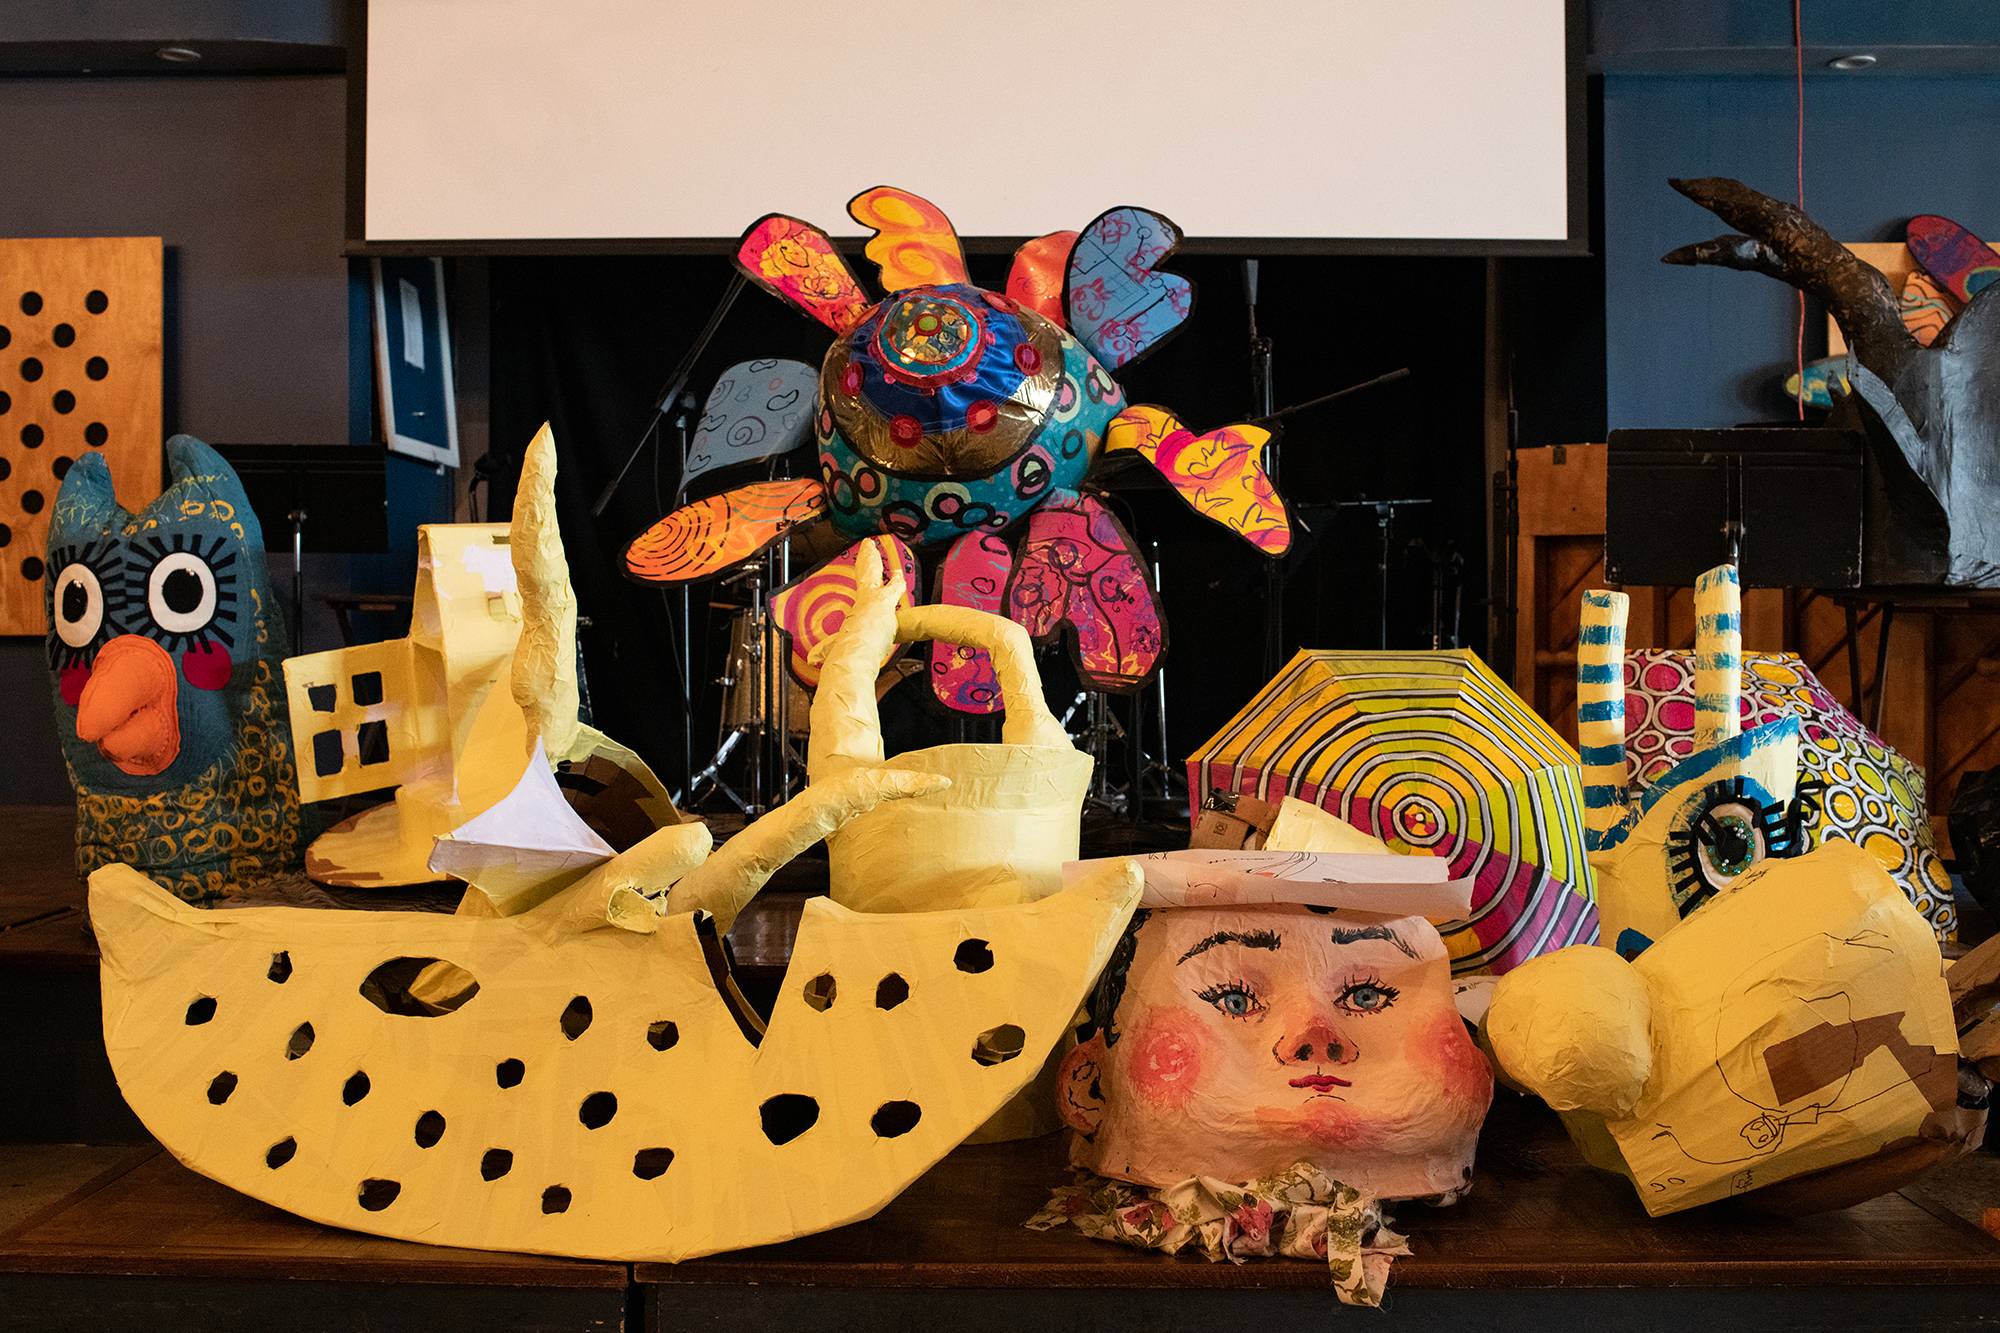 Costume pieces sit on a stage at the Central Venue in Athens, Ohio before being used in the Honey for the Heart parade.